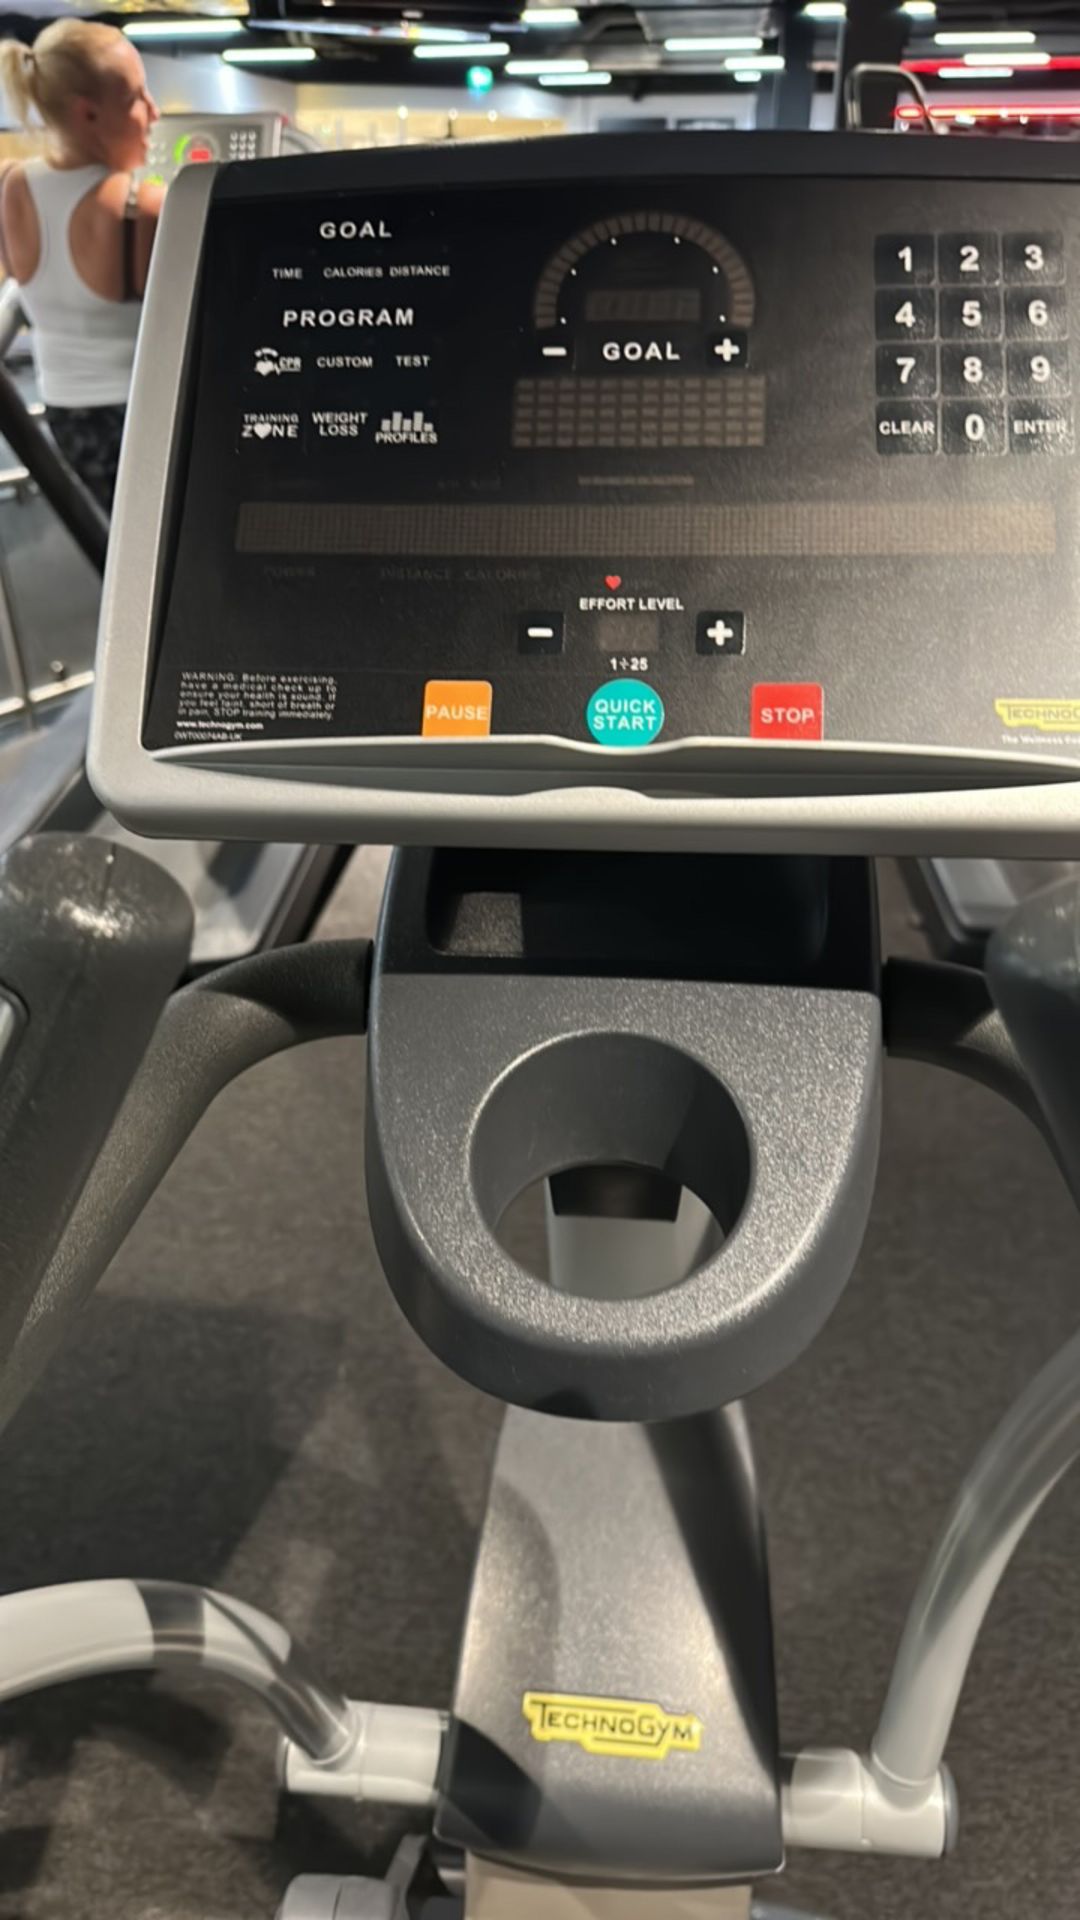 Technogym Excite SYNCHRO 700SP LED CL Cross Trainer - Image 2 of 4